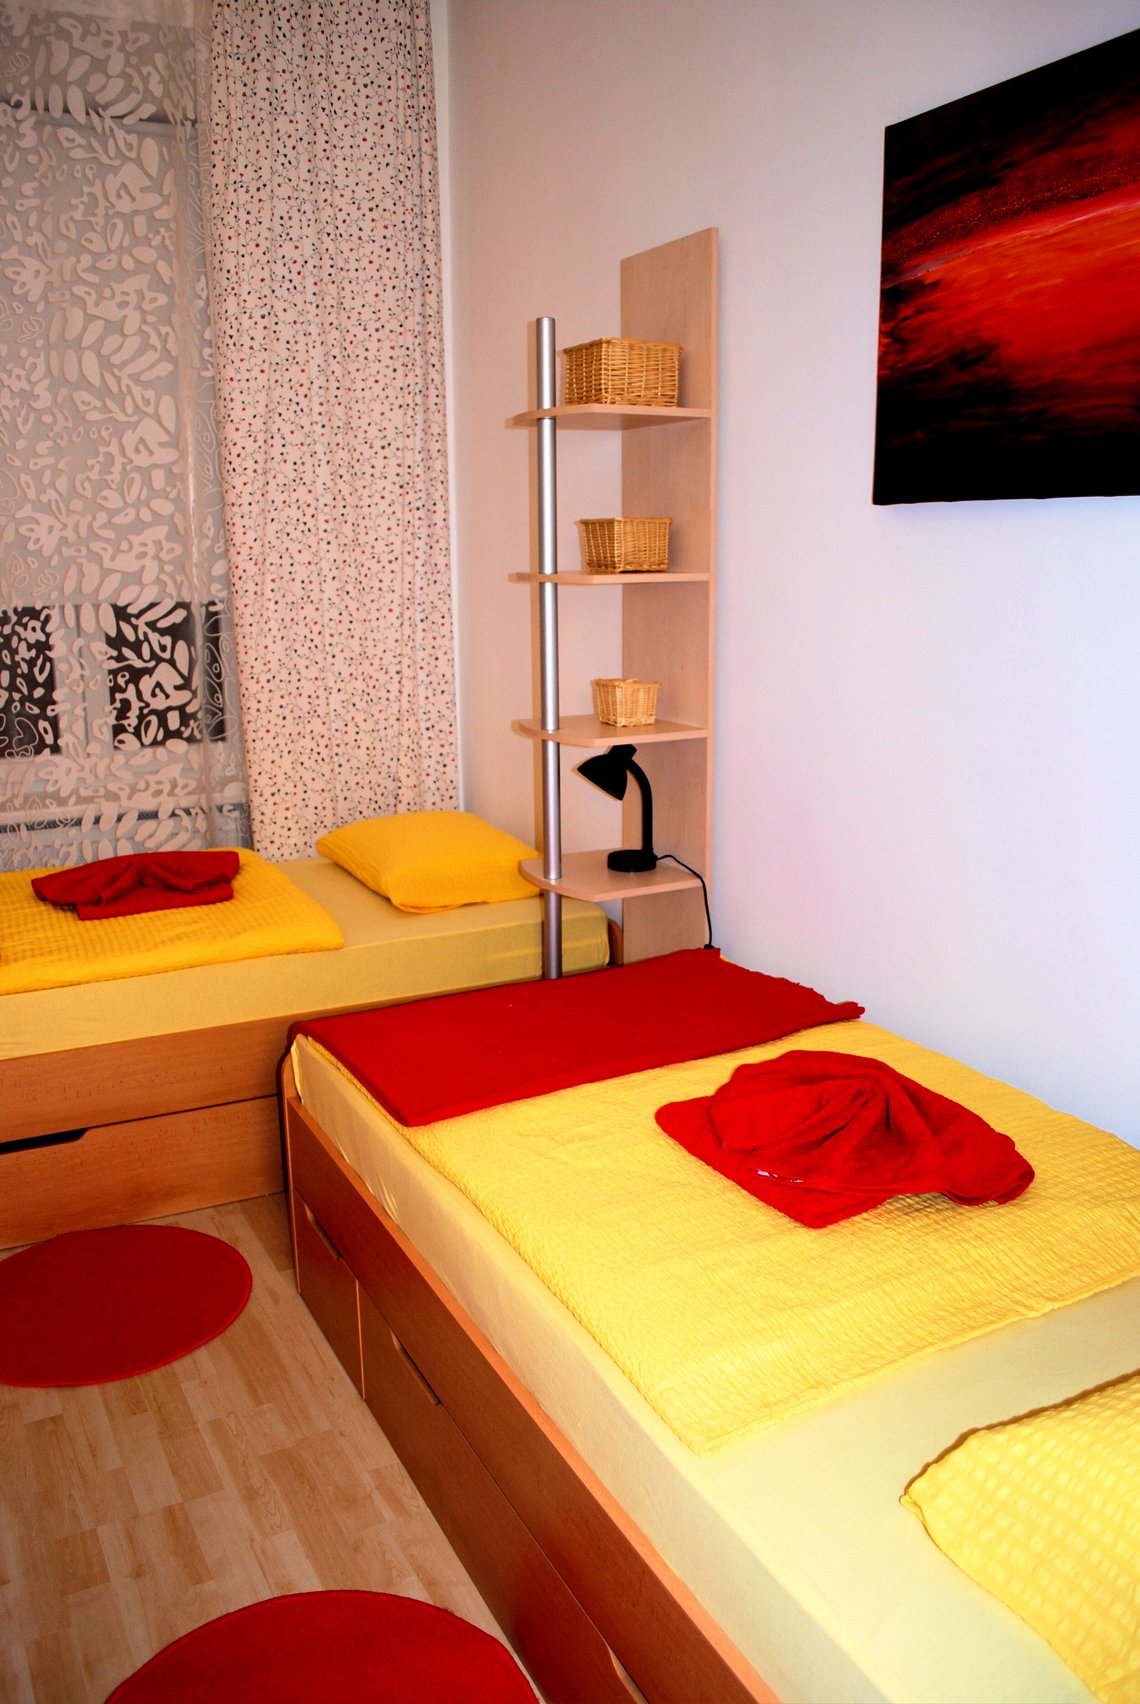  holiday accomodation in vienna with a second room